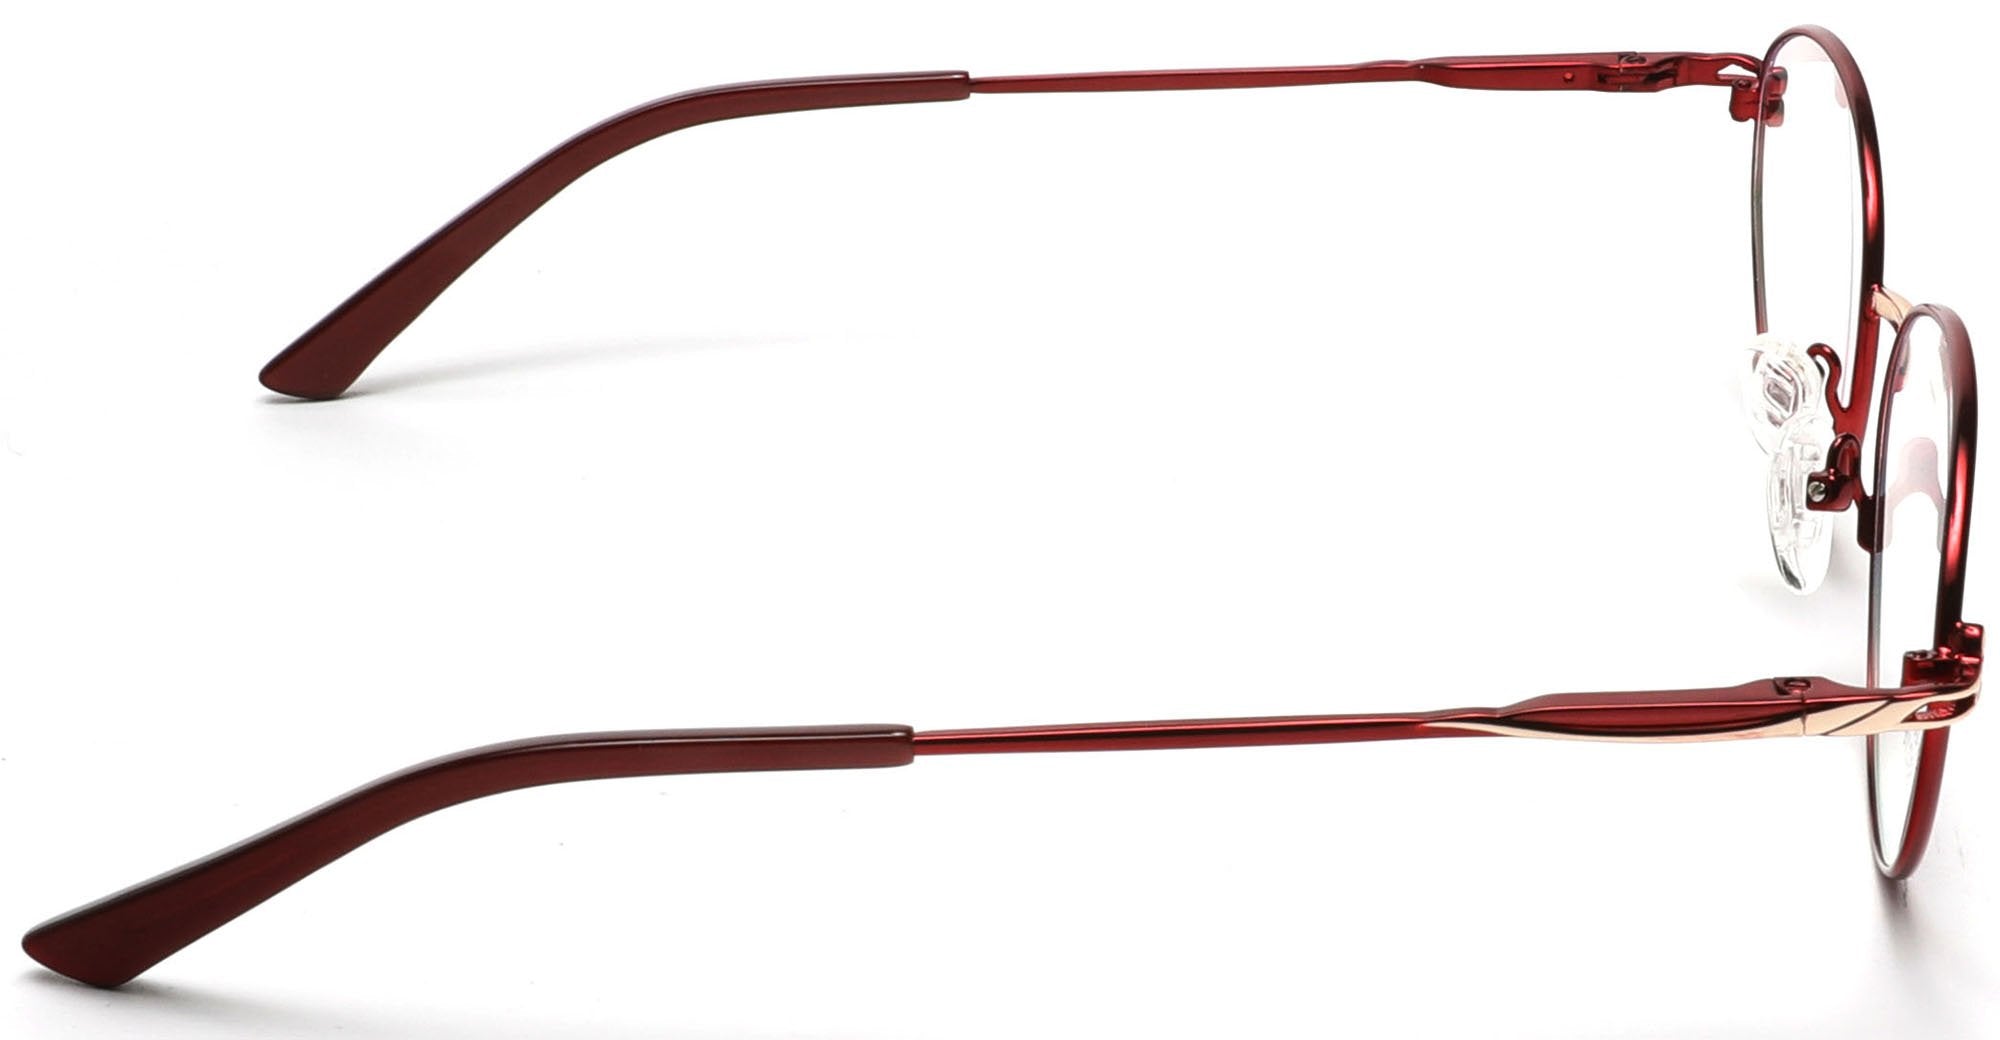 Tango Optics Round Metal Eyeglasses Frame Luxe Reading Stainless Steel Gold Accent Caresse Crosby Red For Prescription Lens-Samba Shades